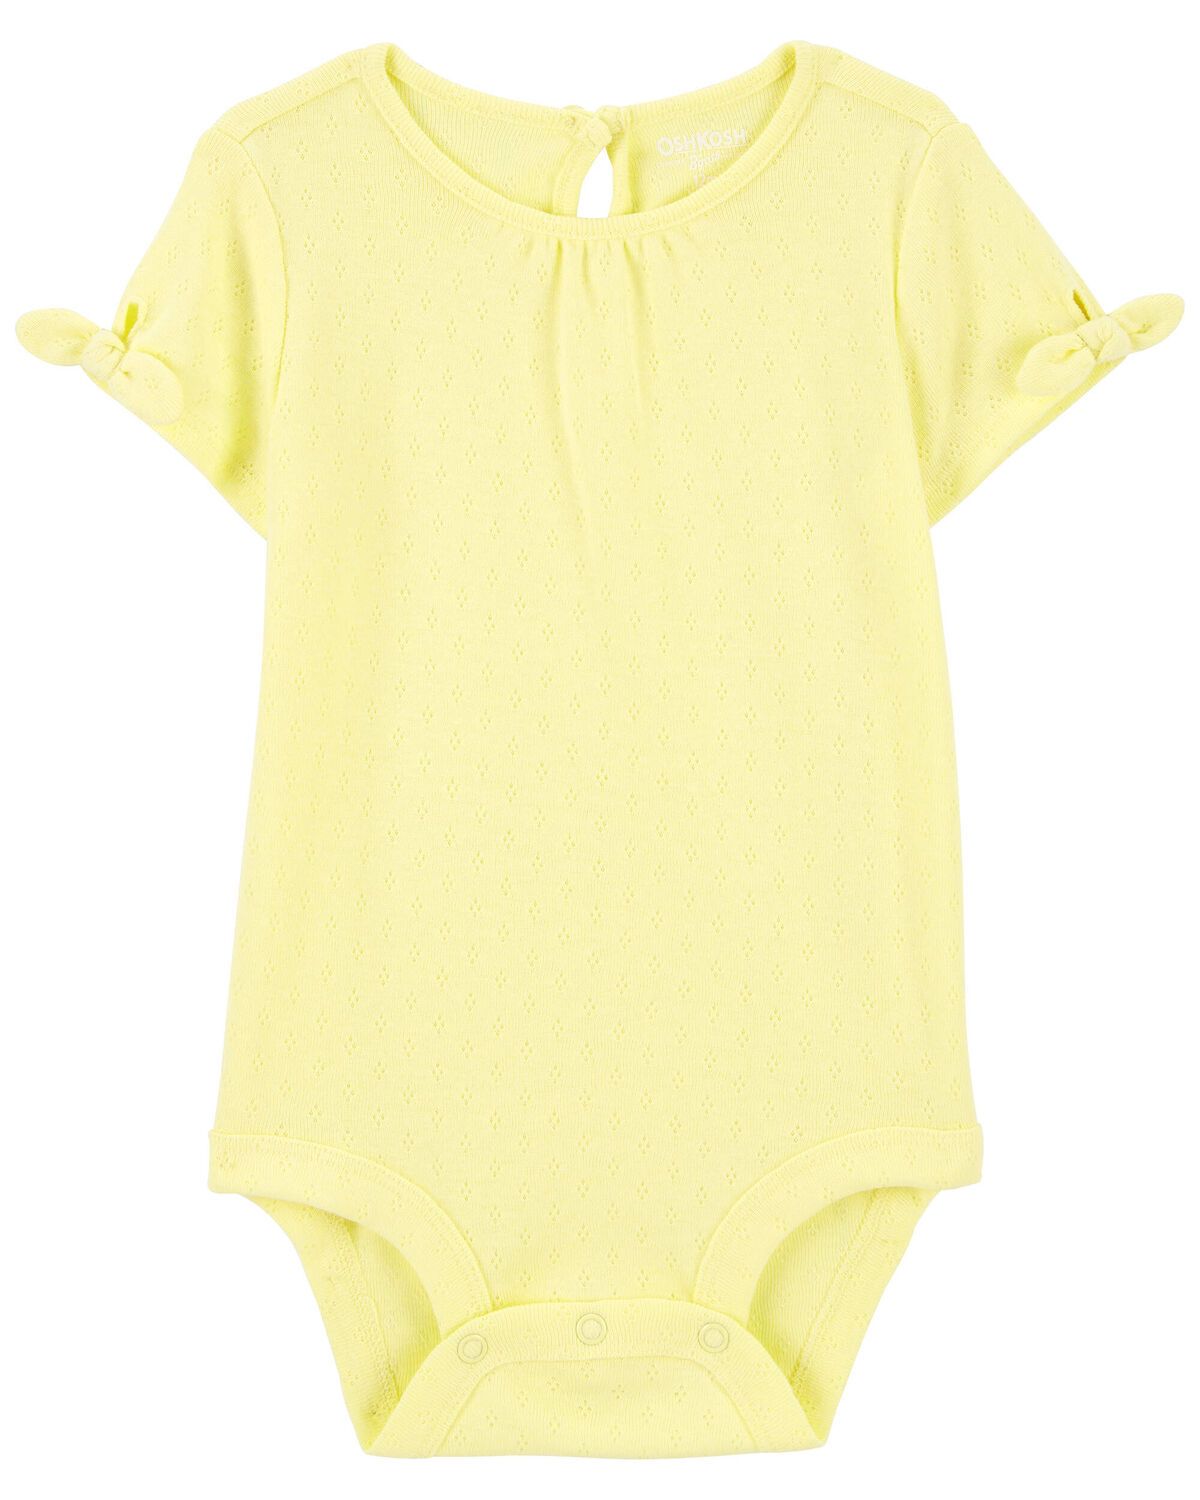 Yellow Baby Pointelle Bodysuit | carters.com | Carter's